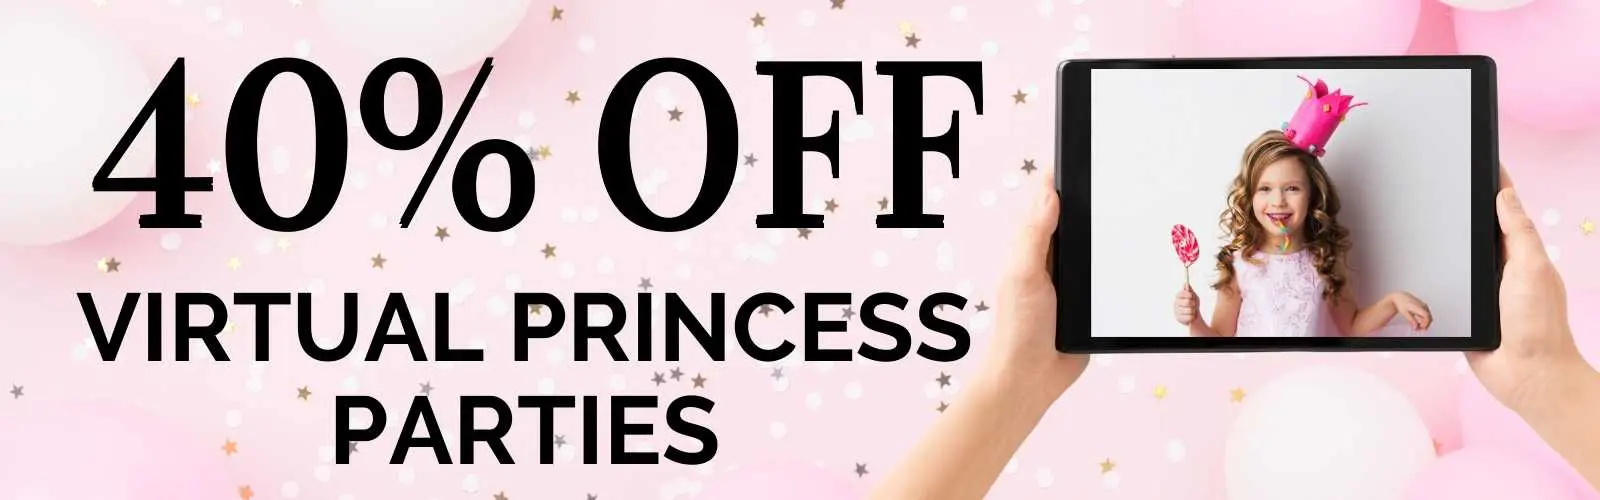 promotions in virtual princess parties